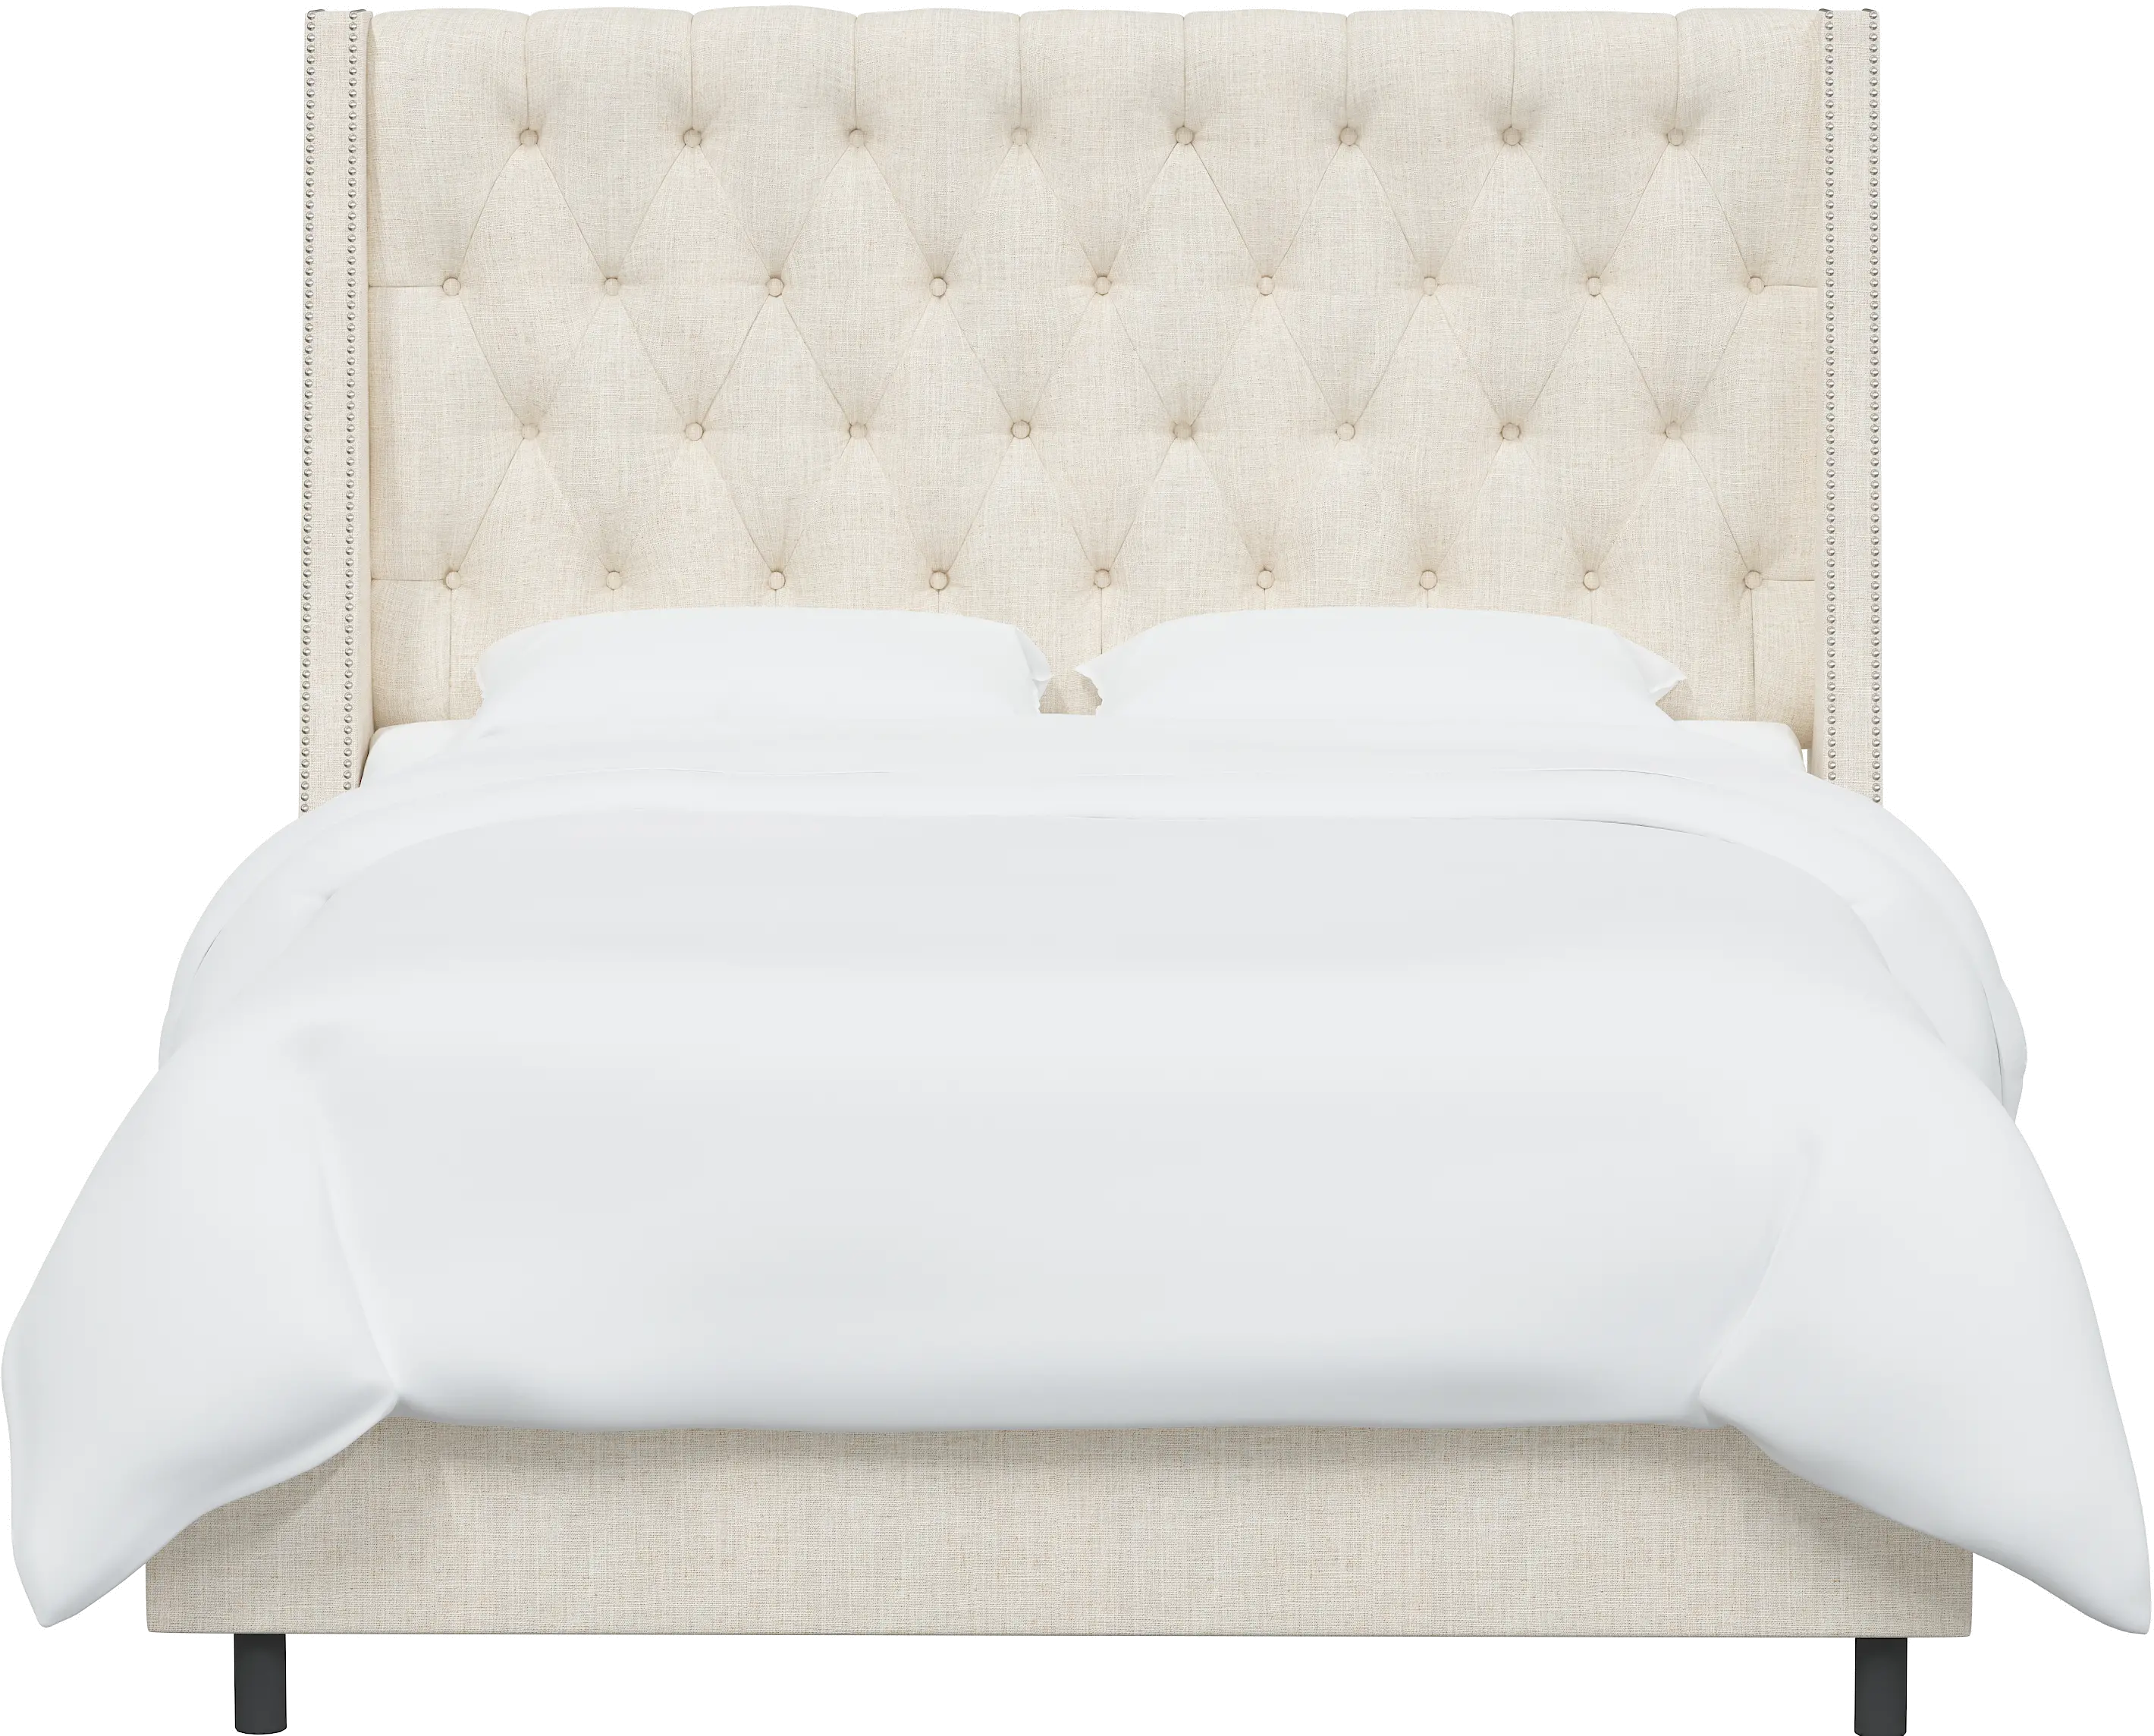 Riley Cream Flared Wingback Queen Bed - Skyline Furniture